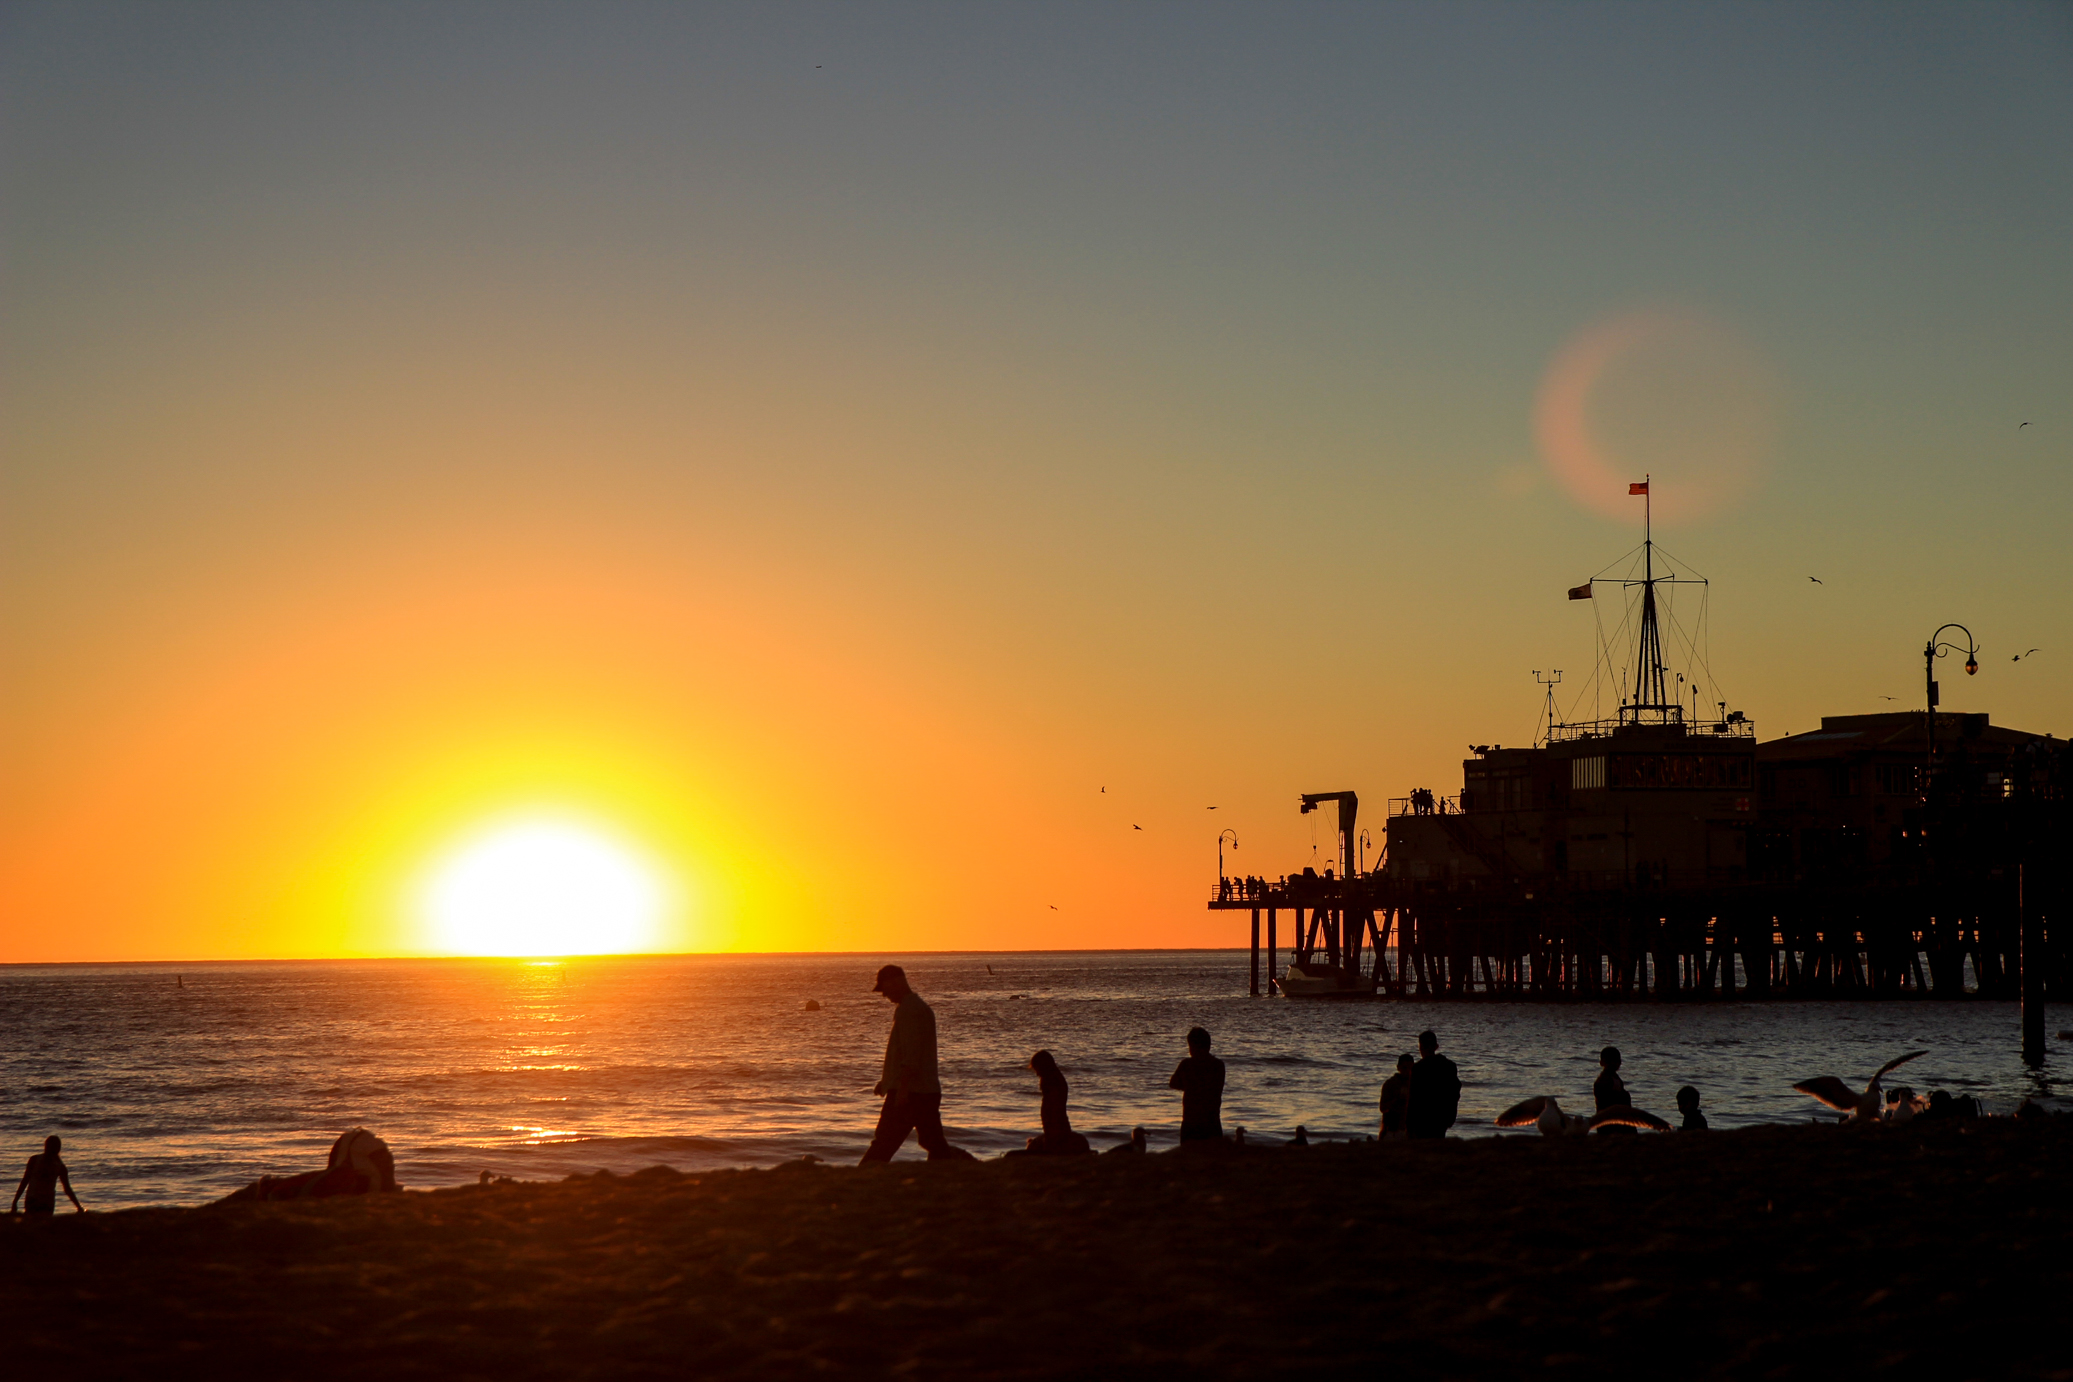 5 Best Los Angeles Beaches for a $20 Date | What beaches made the list for a cheap date? Find out!